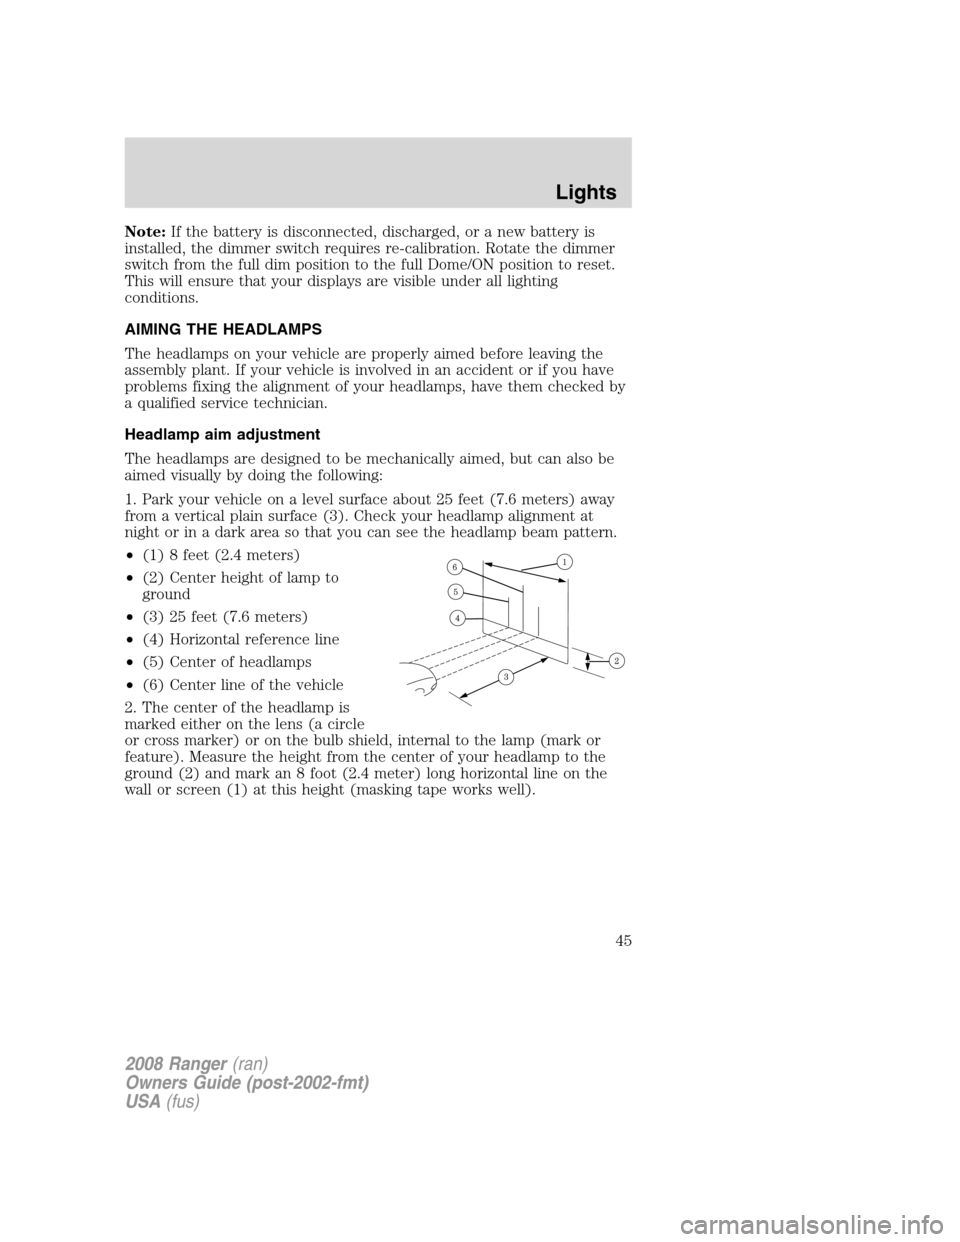 FORD RANGER 2008 2.G Service Manual Note:If the battery is disconnected, discharged, or a new battery is
installed, the dimmer switch requires re-calibration. Rotate the dimmer
switch from the full dim position to the full Dome/ON posit